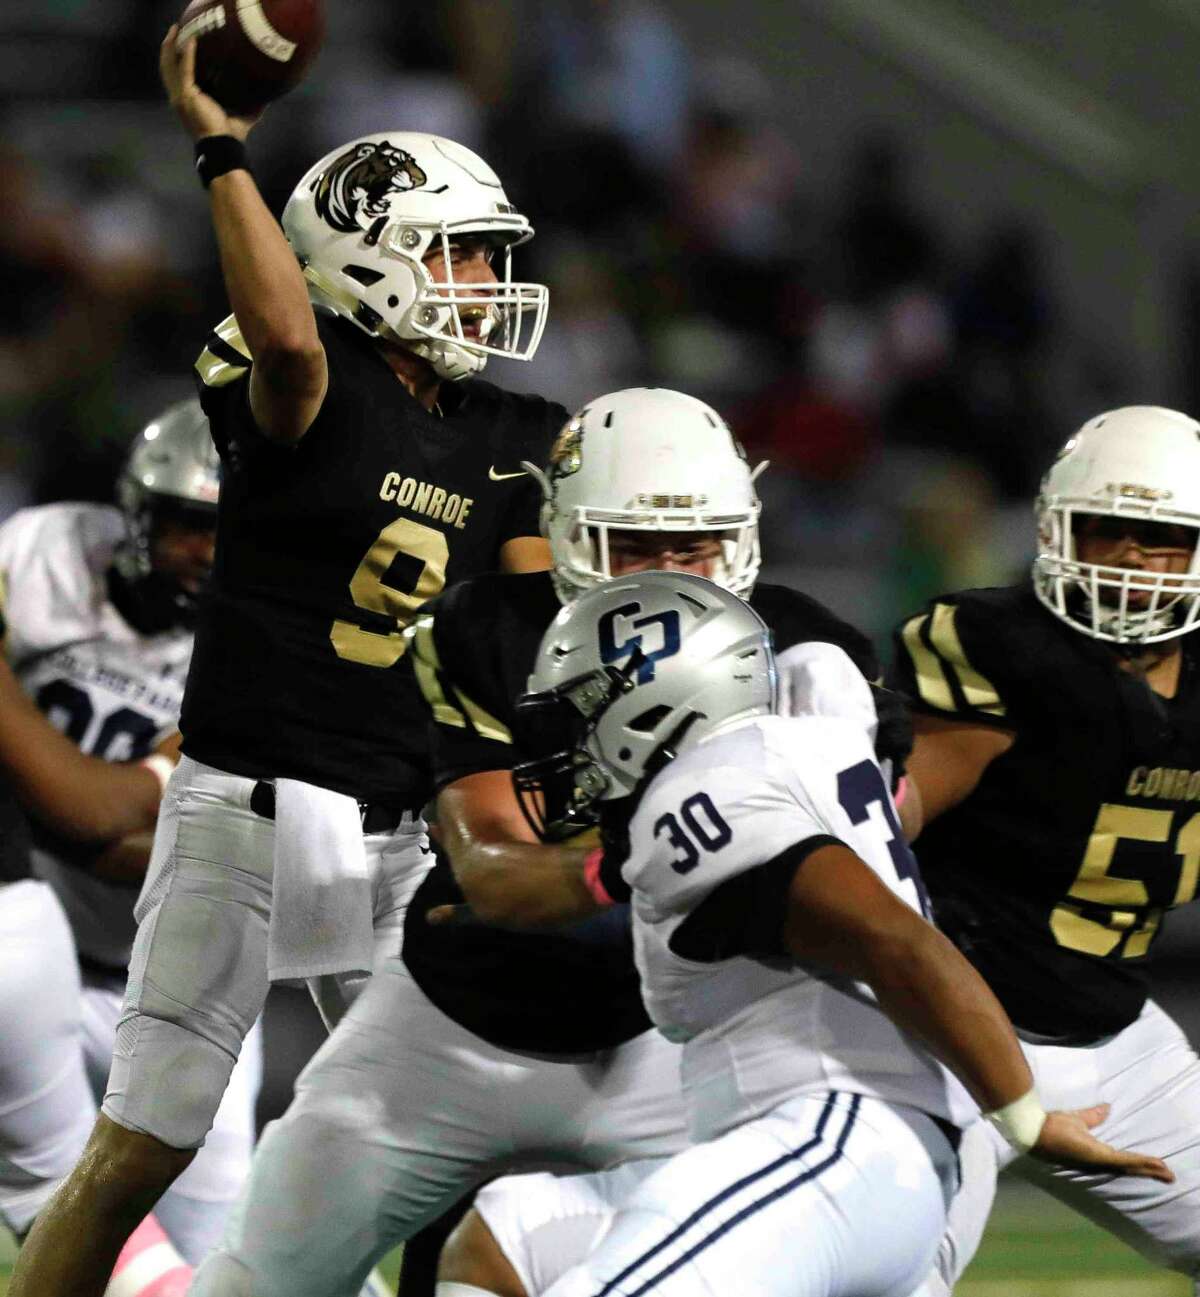 Conroe starting quarterback Clayton Garlock (9) throws under pressure during the second quarter of a high school football game at Buddy Moorhead Stadium, Friday, Oct. 22, 2021, in Conroe